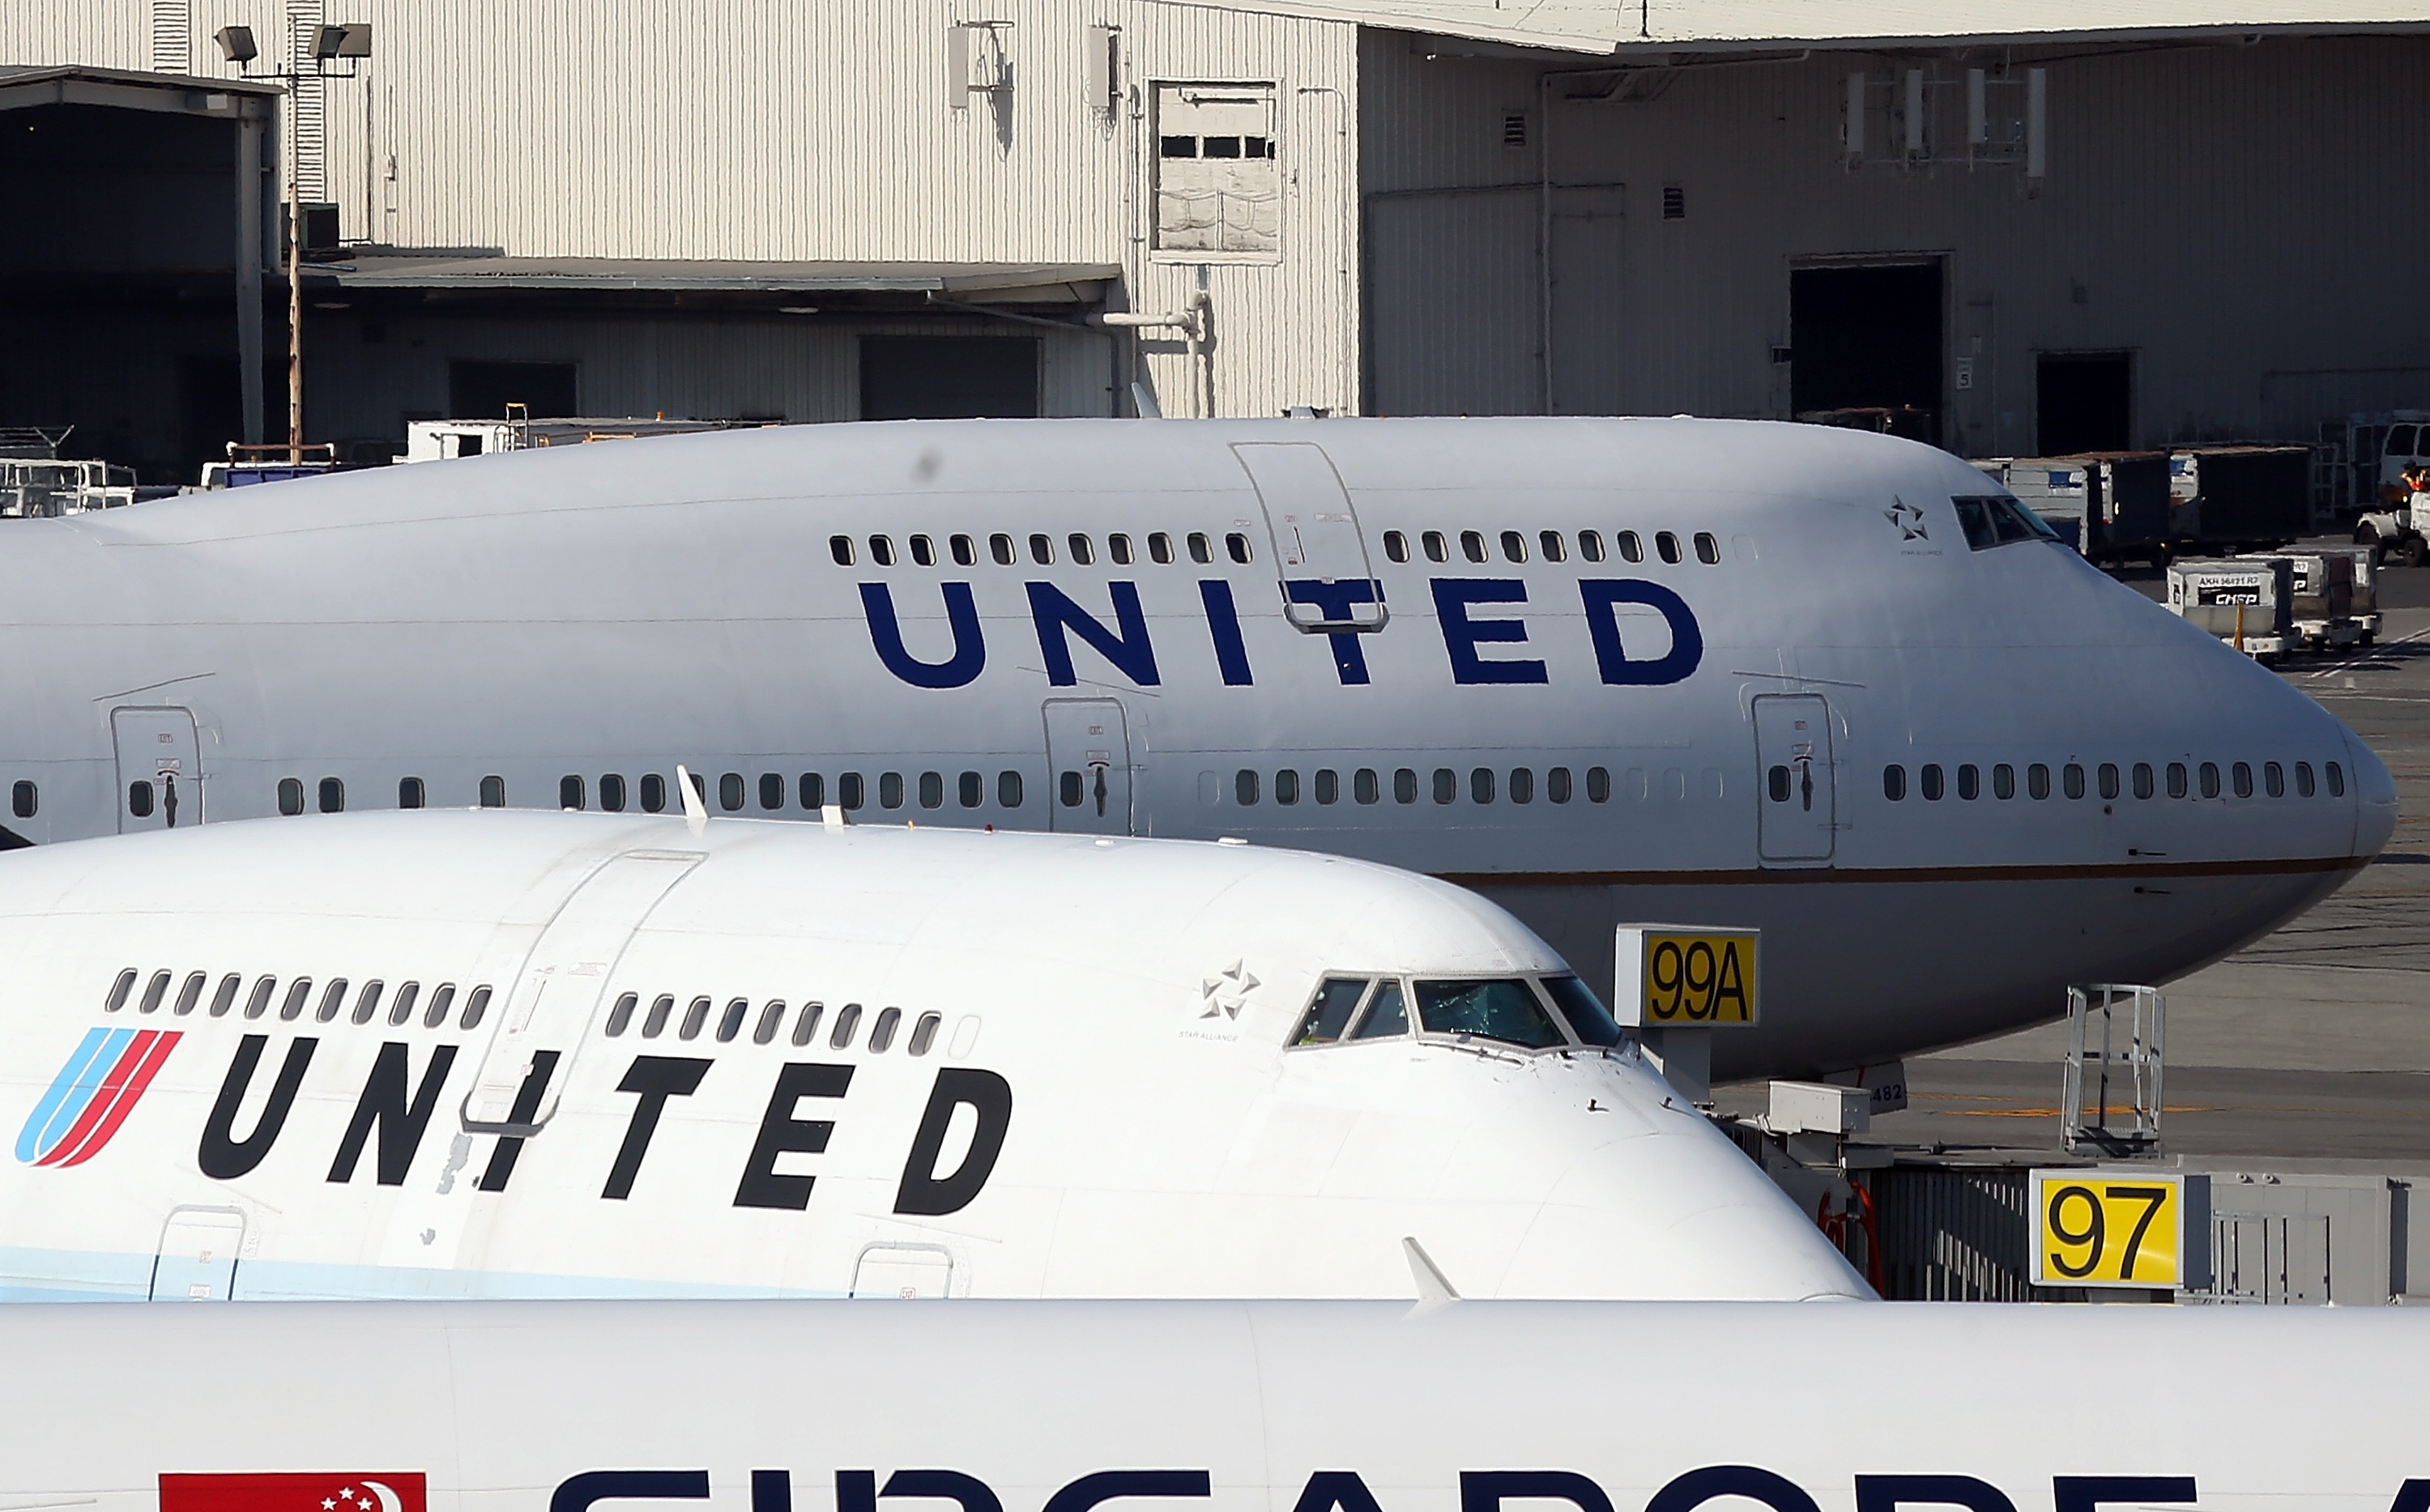 United Airlines planes sit on the tarmac at San Francisco International Airport on January 23, 2014 in San Francisco, California. (Justin Sullivan—Getty Images)